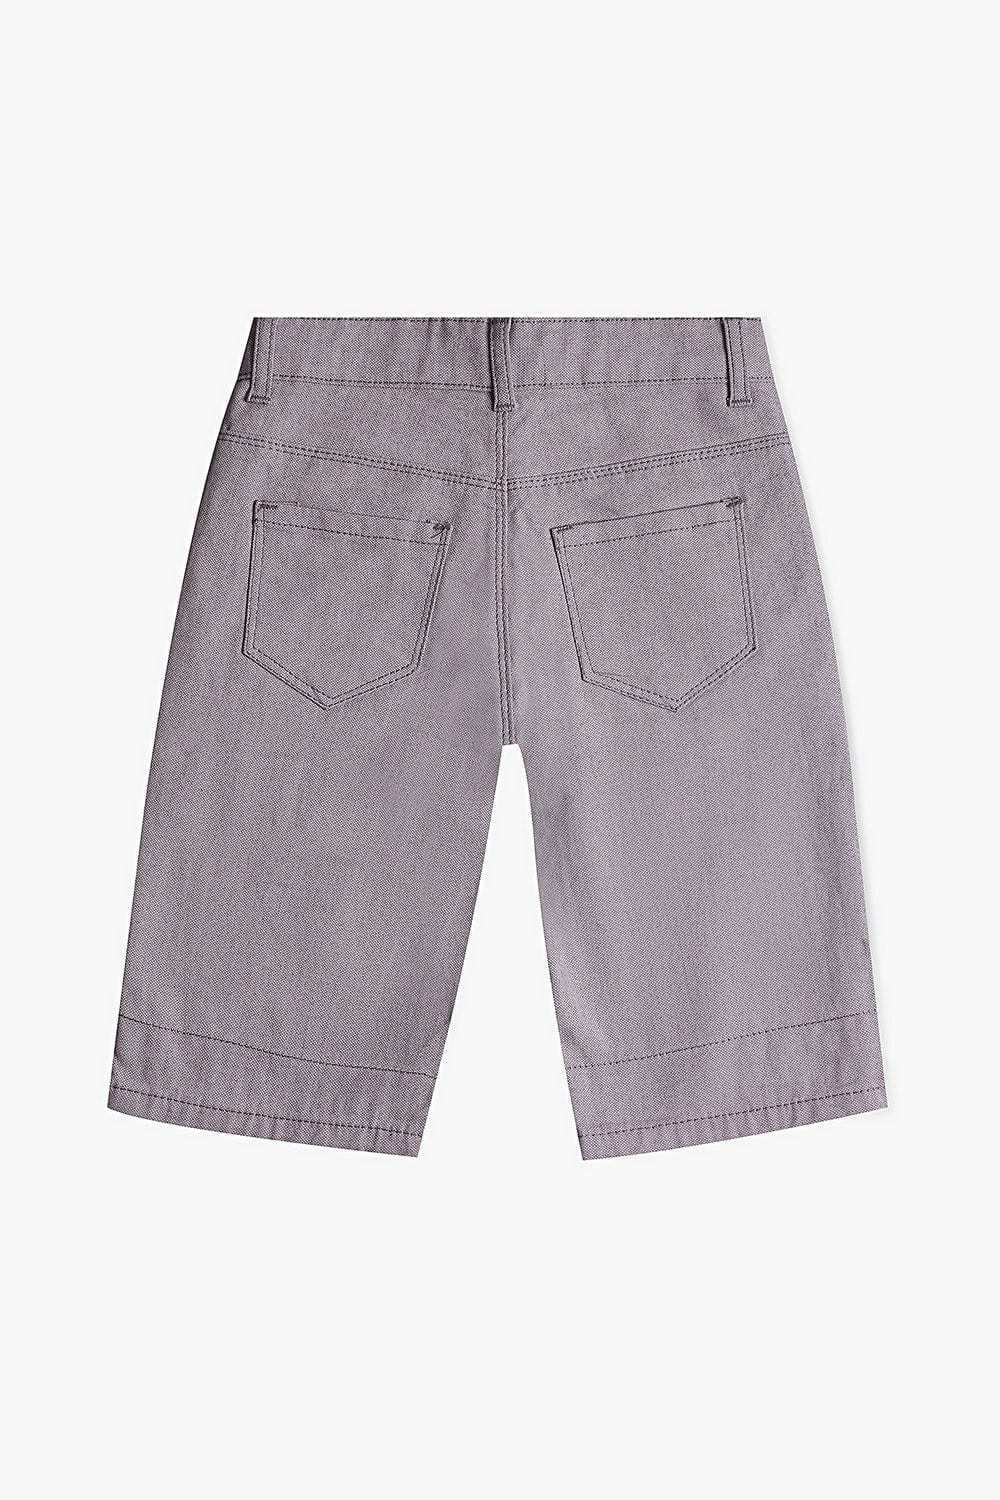 Hope Not Out by Shahid Afridi Boys Denim Shorts Denim Shorts with Contrast Bottom